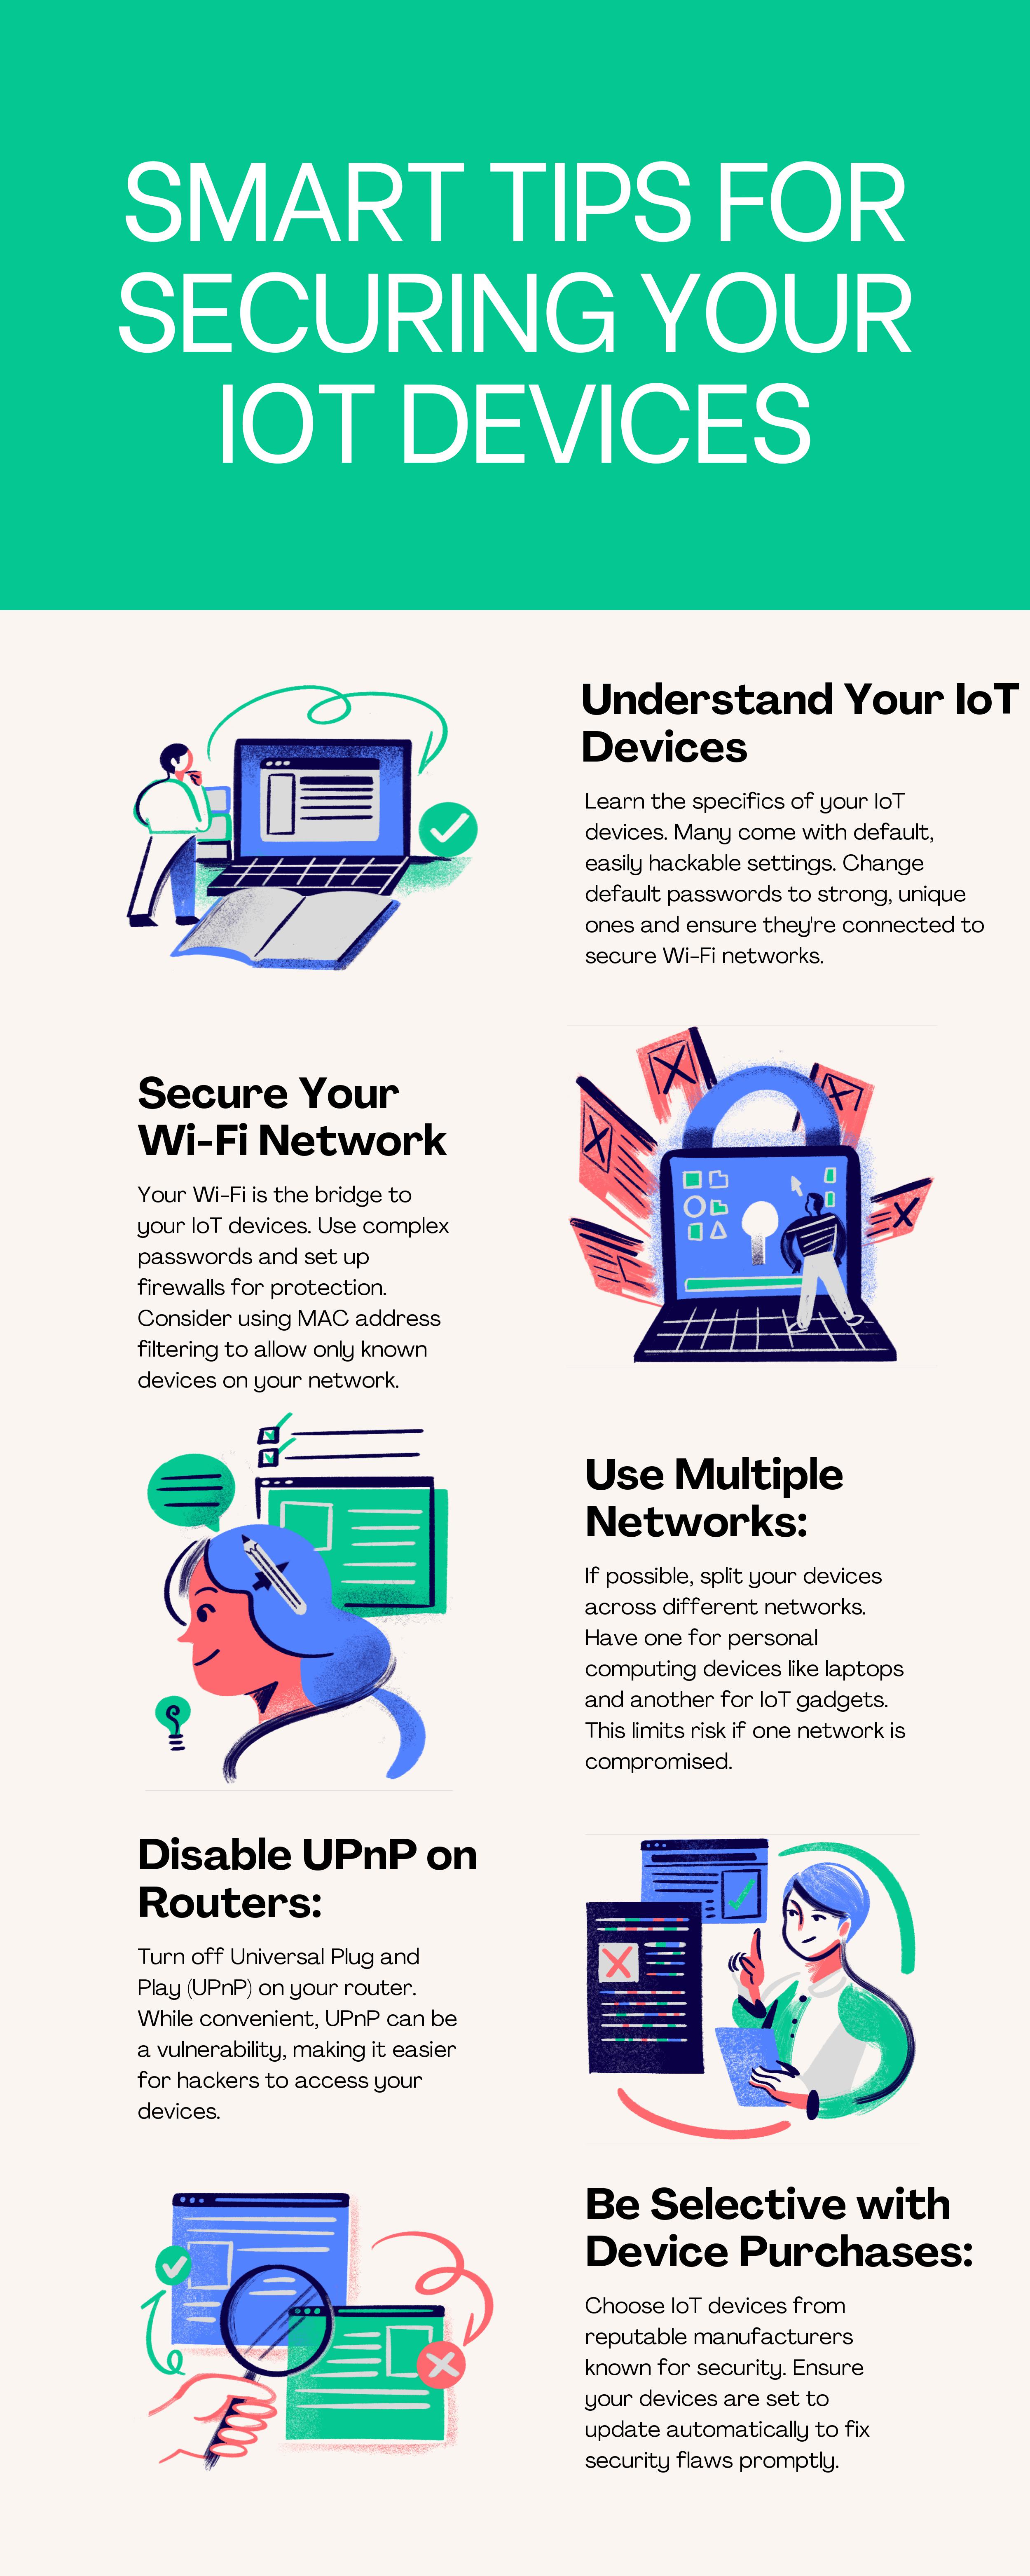 Smart-Tips-for-Securing-Your-IoT-Devices-1.jpg